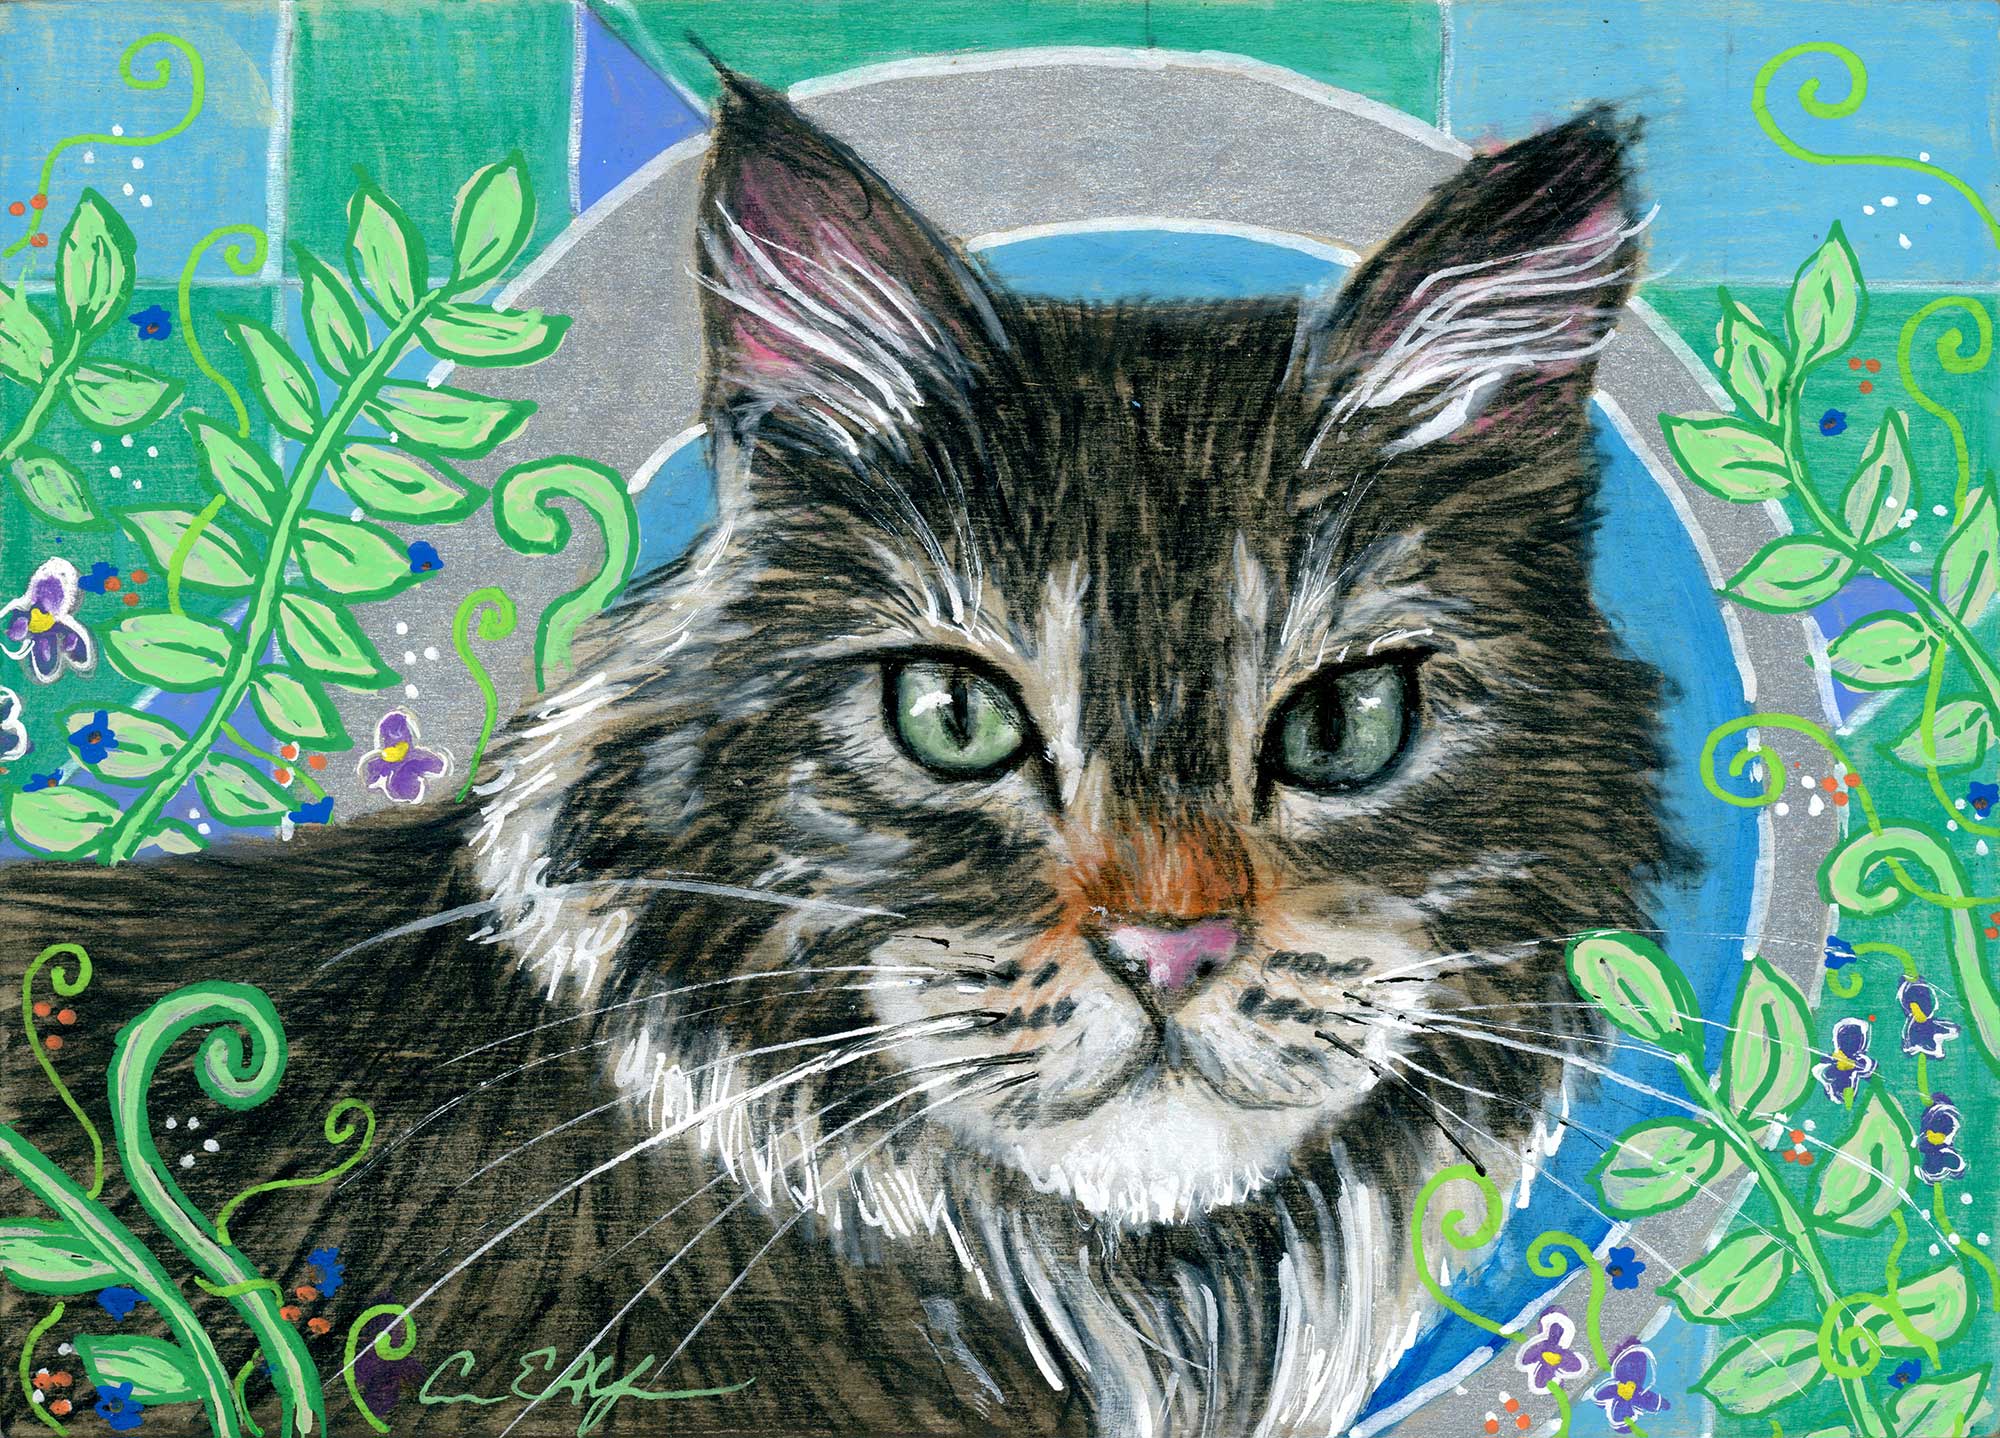 SOLD - "Whiskers and Ferns", 7" x 5", mixed media